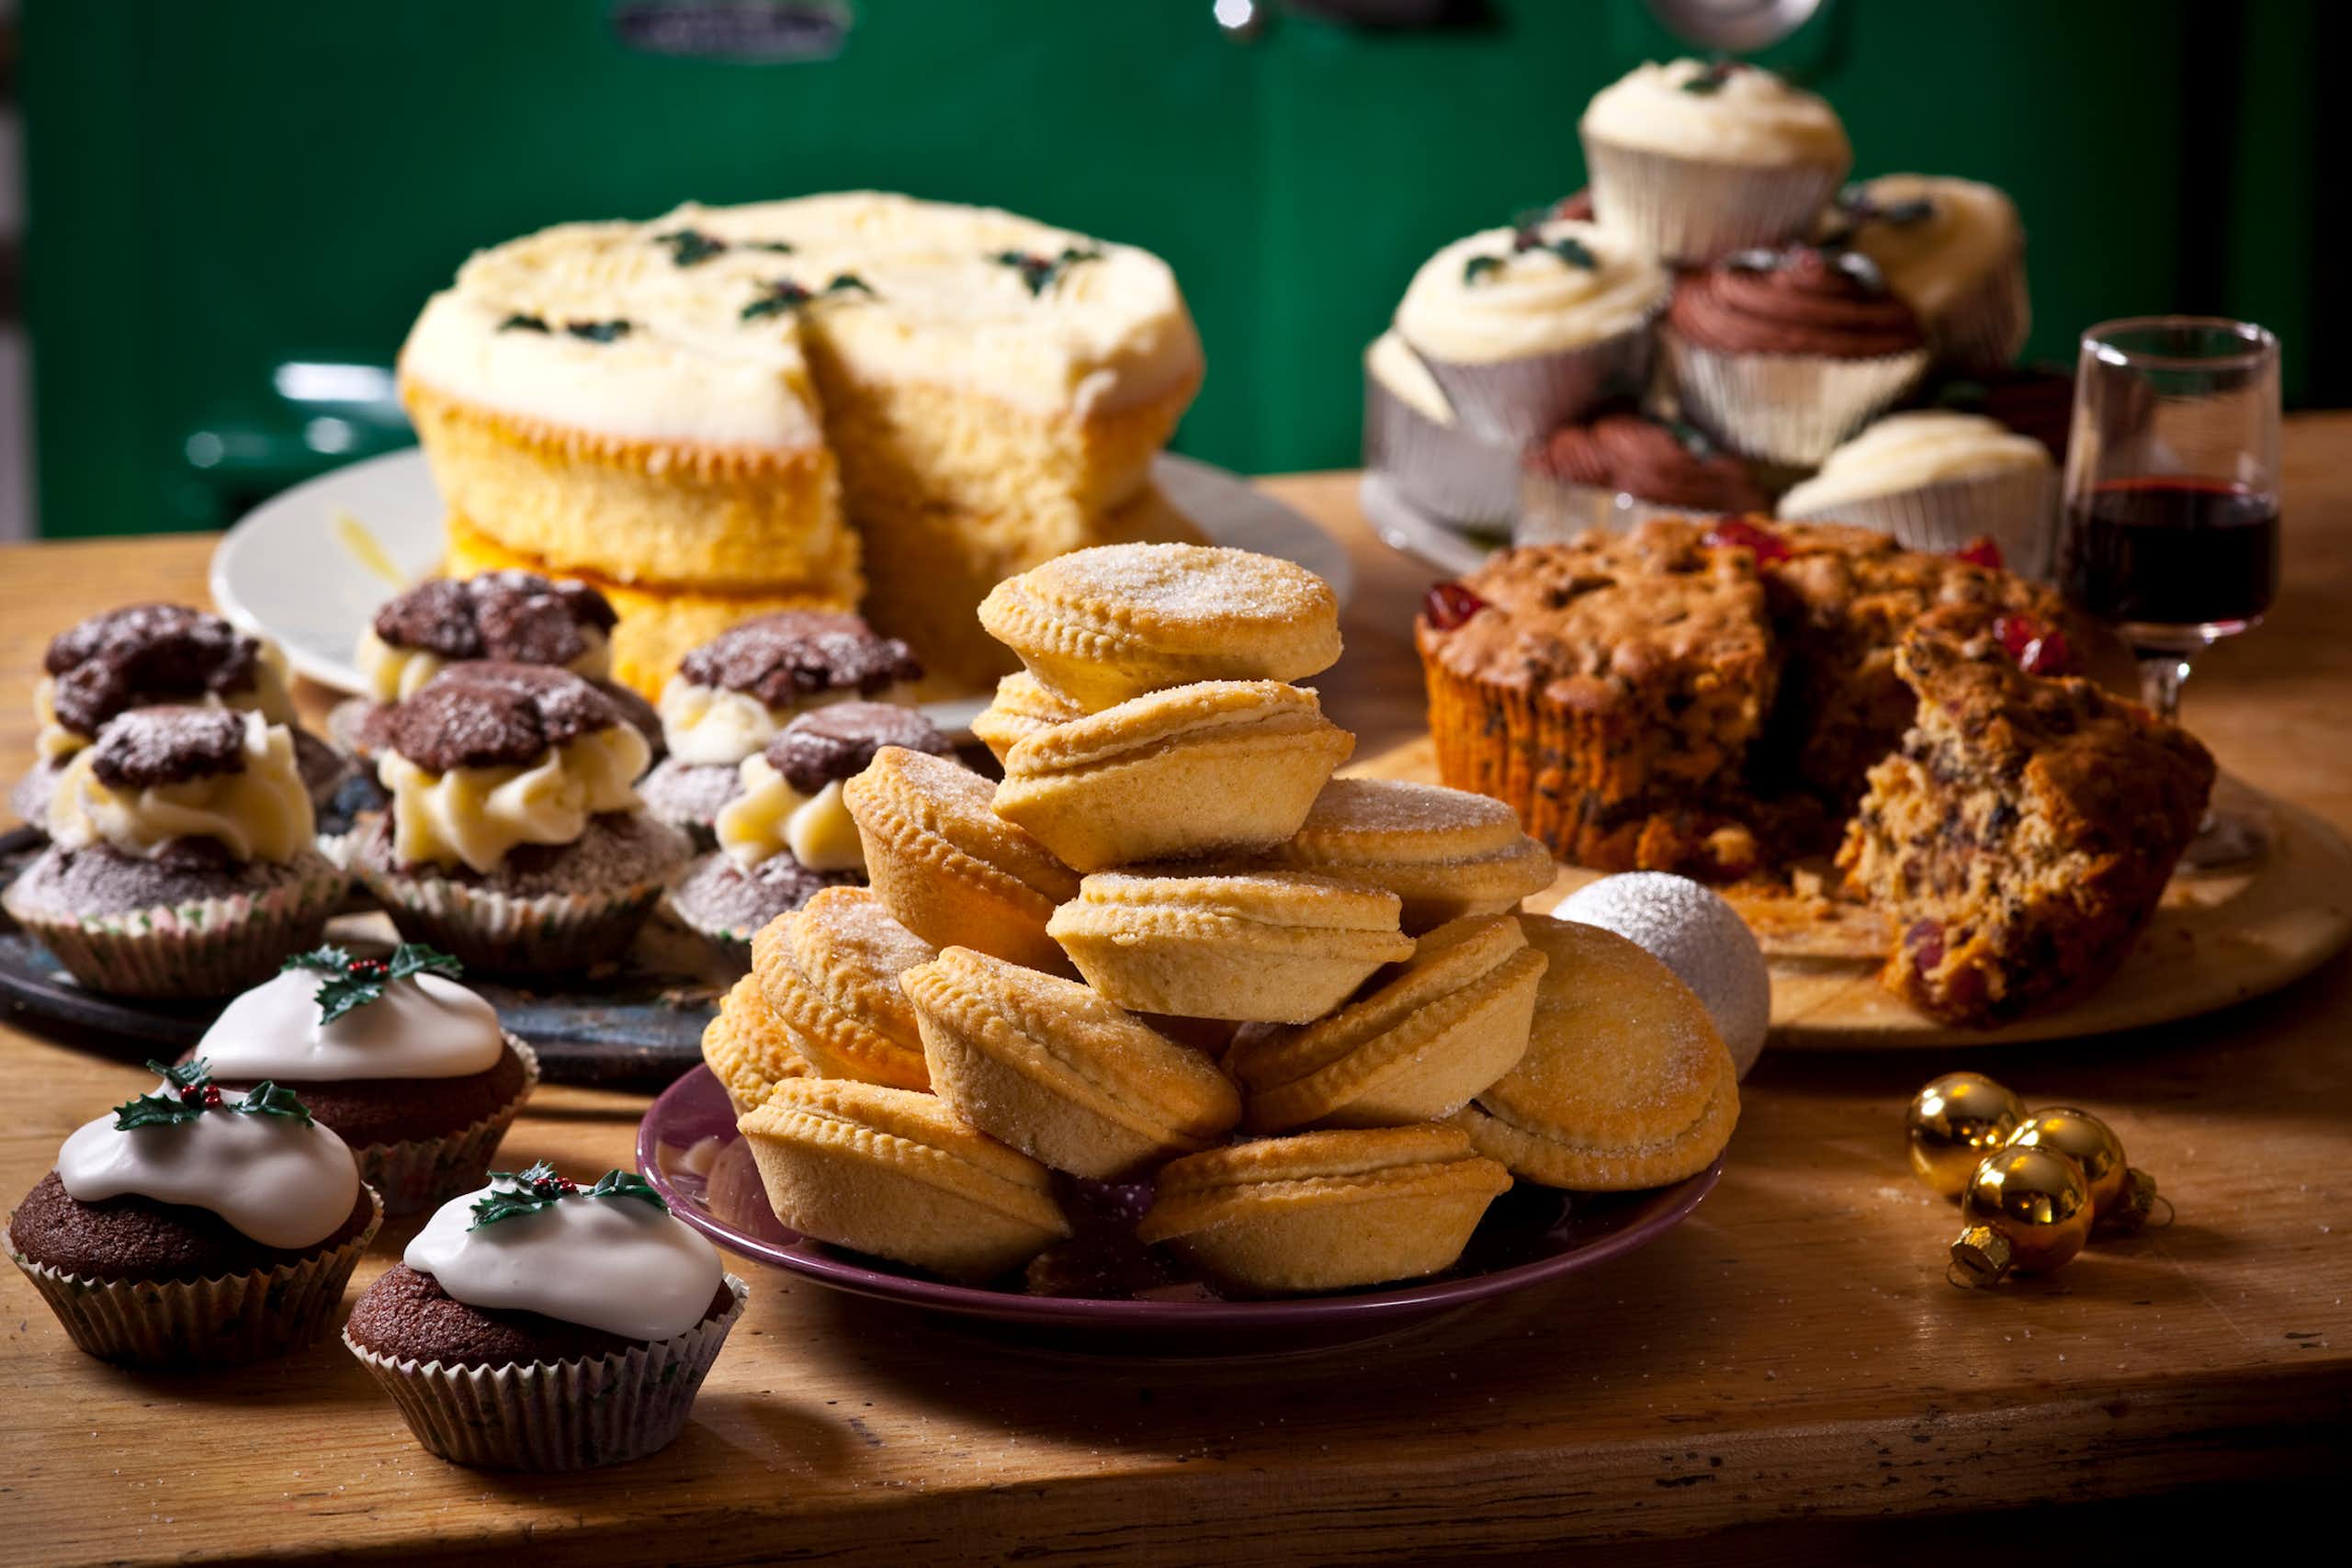 Frosted cupcakes, muffins and sliced cakes are laid out on a table